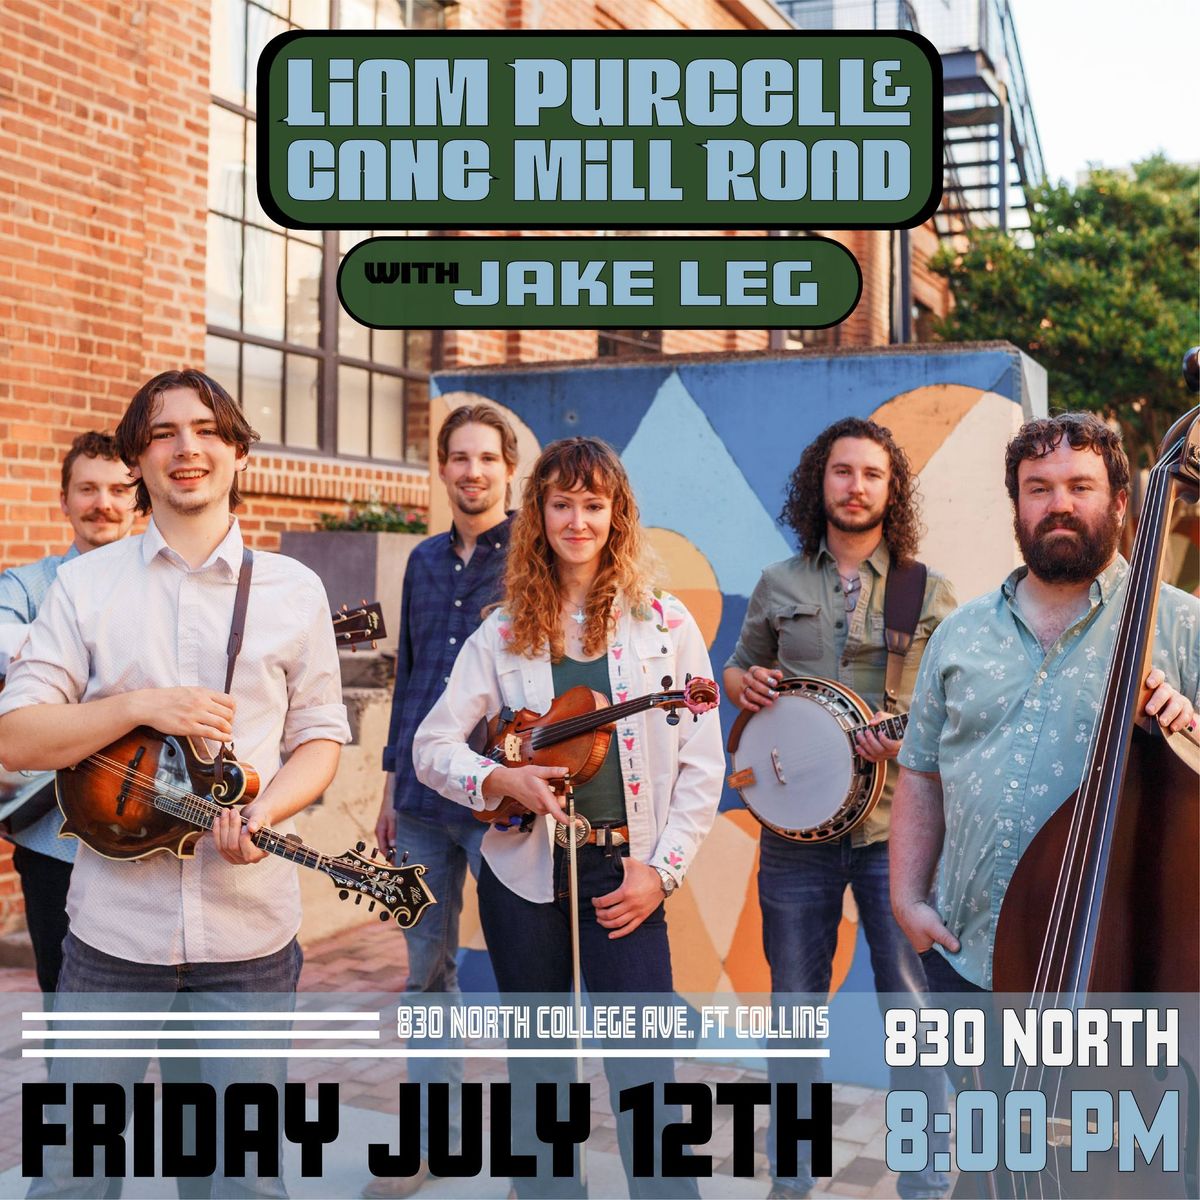 Bluegrass Live on the Lanes - Liam Purcell & Cane Mill Road + Jake Leg